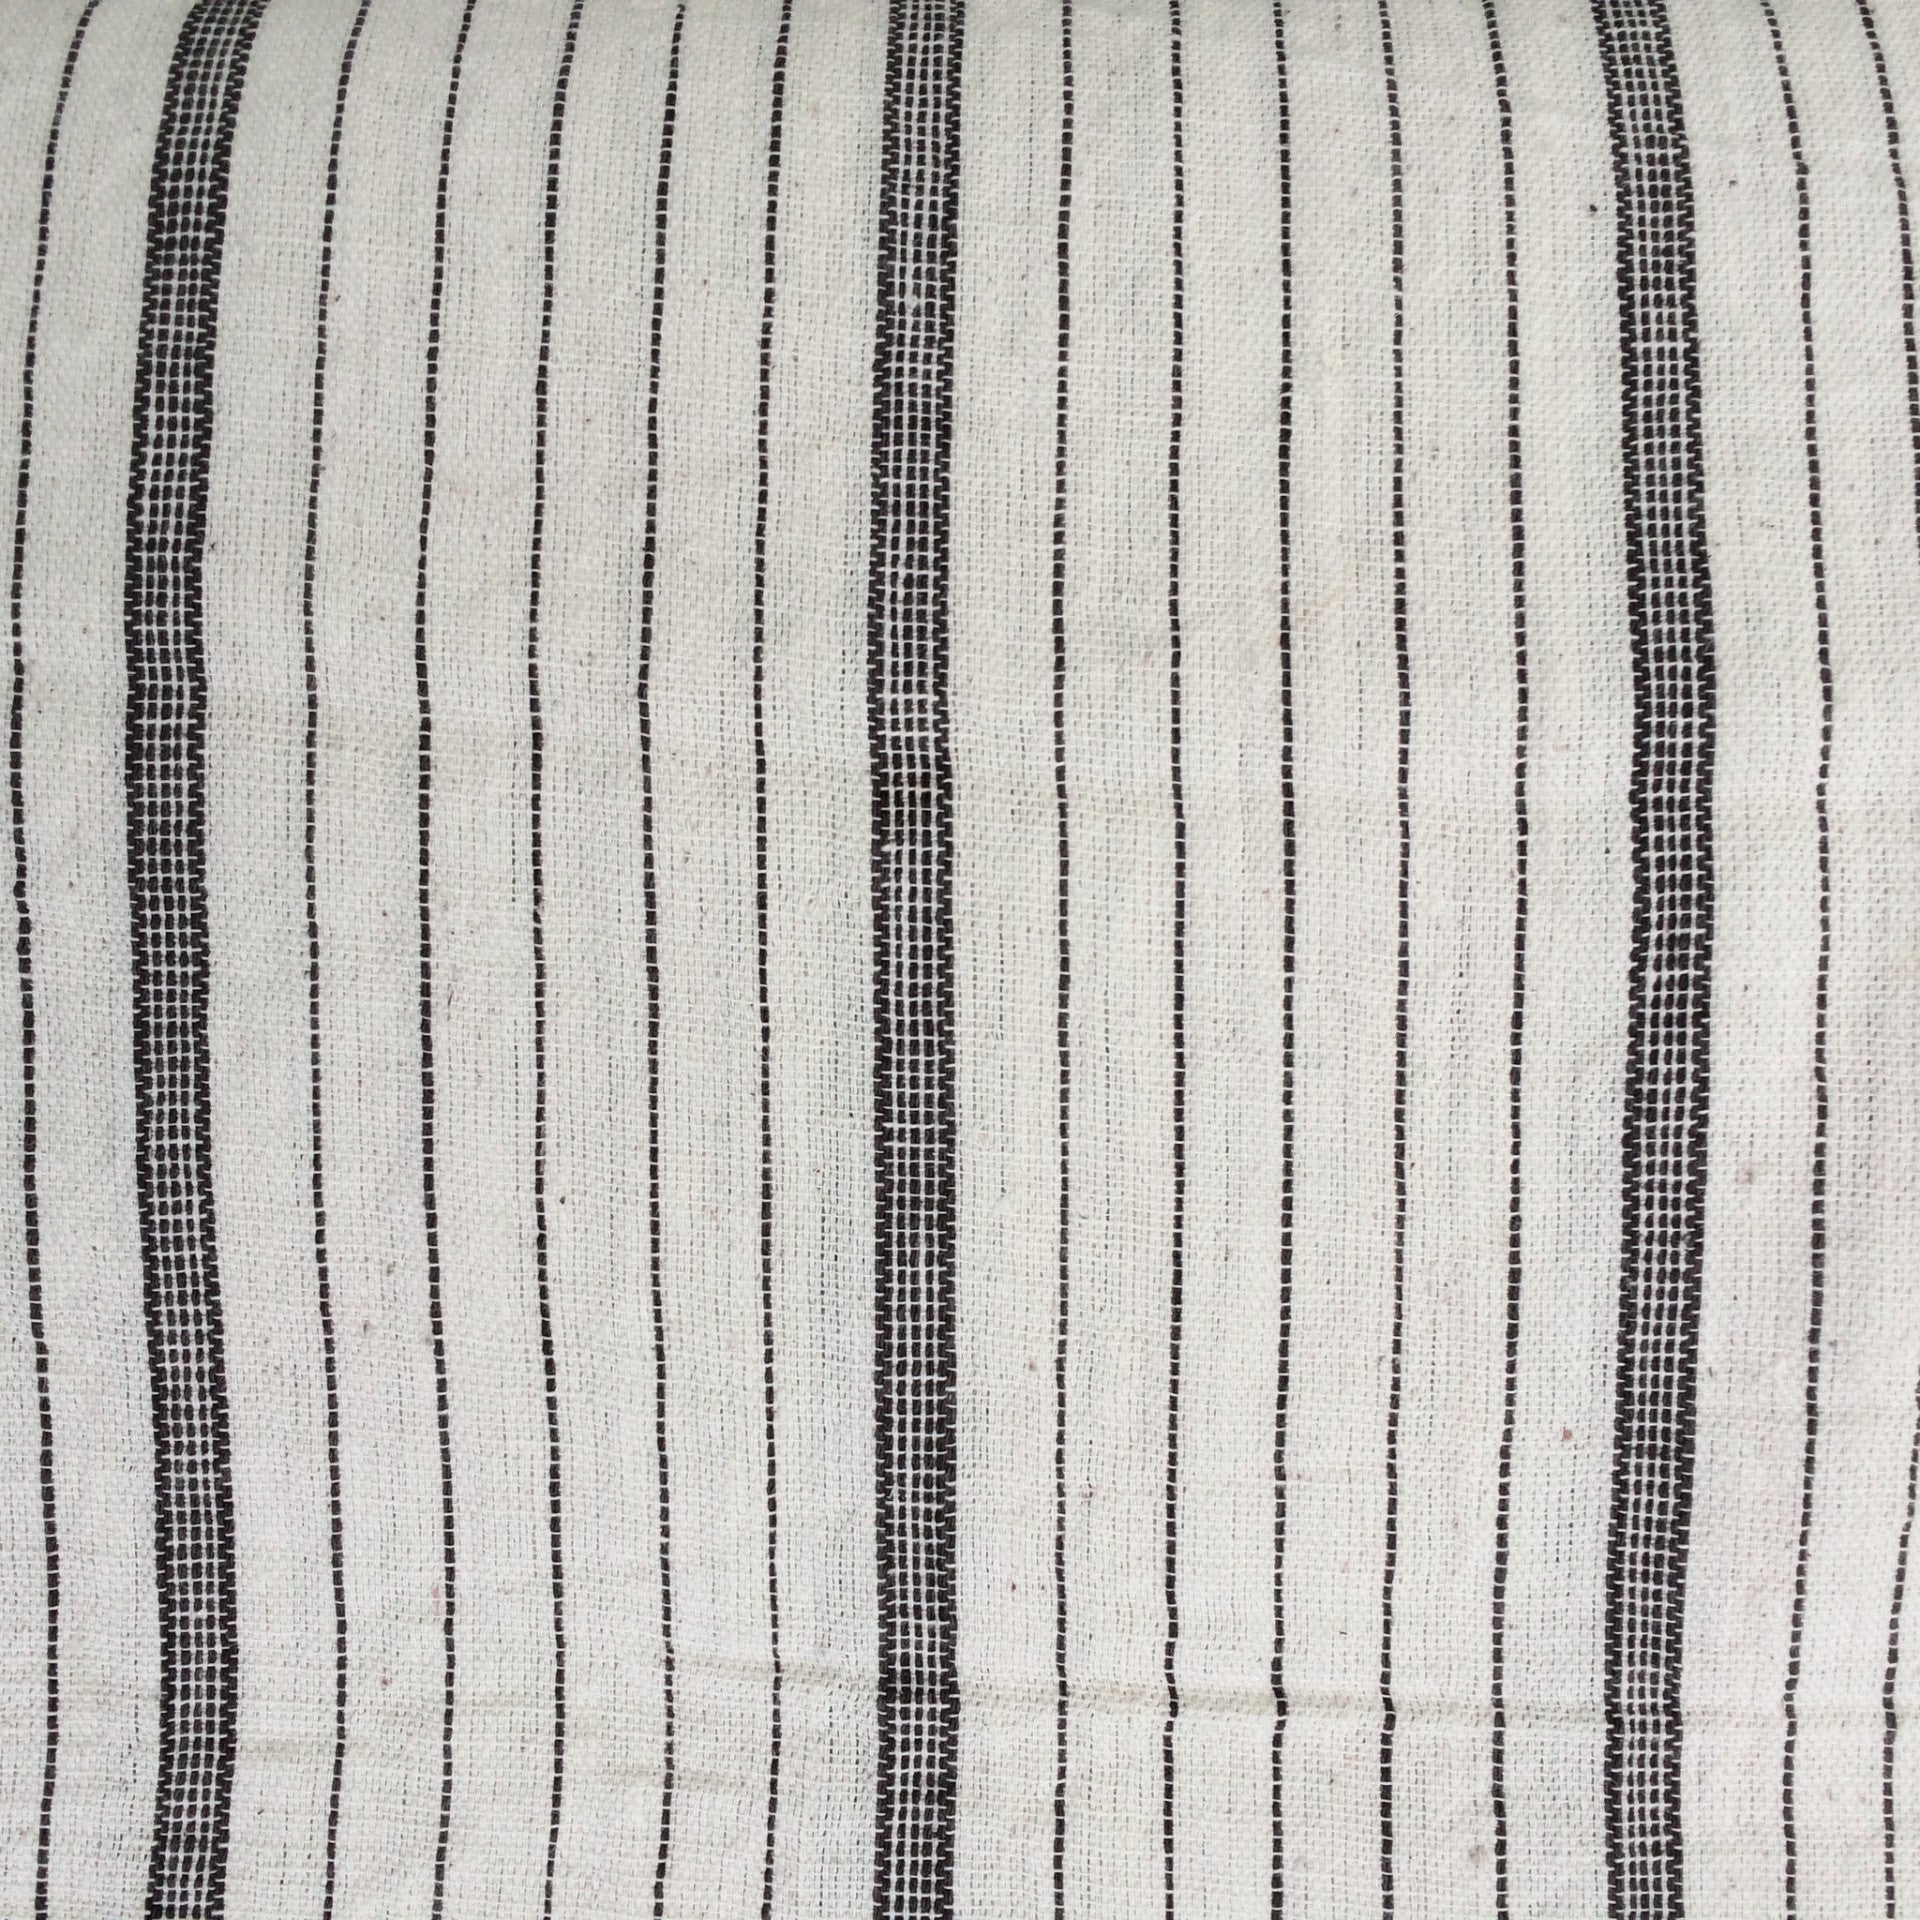 label: Thick and Thin Stripe - Black and White